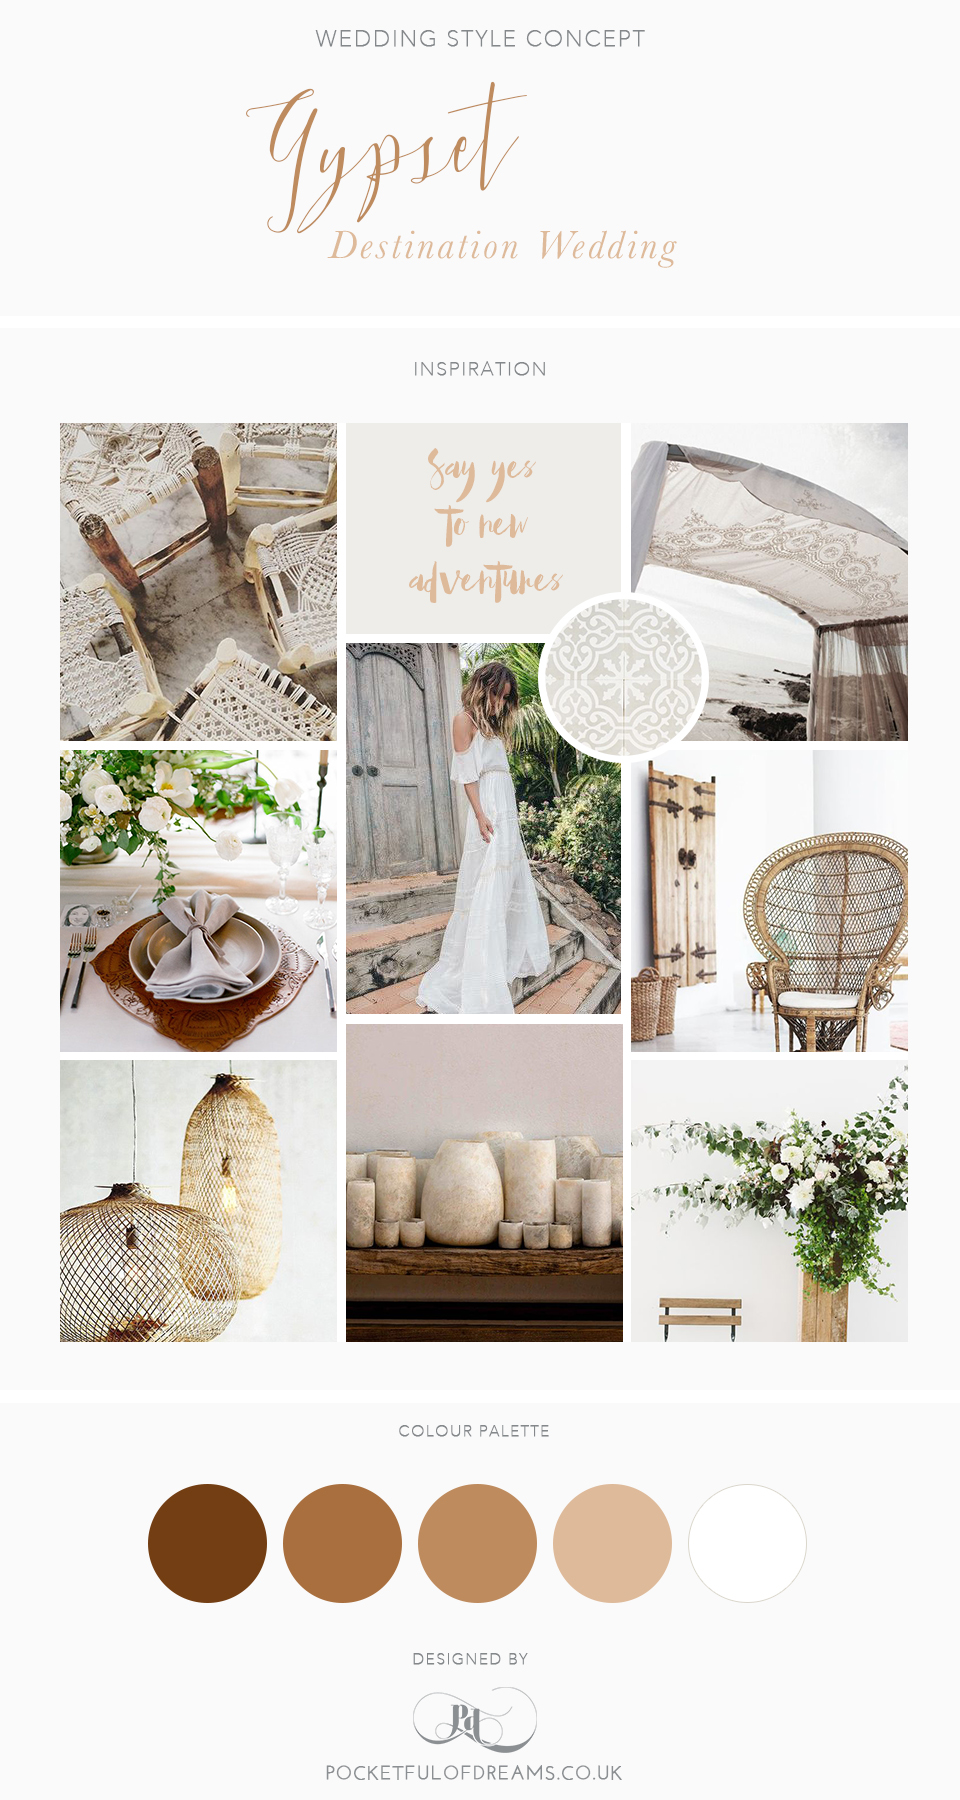 Destination weddings inspiration - influenced by the chic island hangouts of Ibiza and Mykonos with their memory-making sunsets, whitewashed walls and raw natural beauty